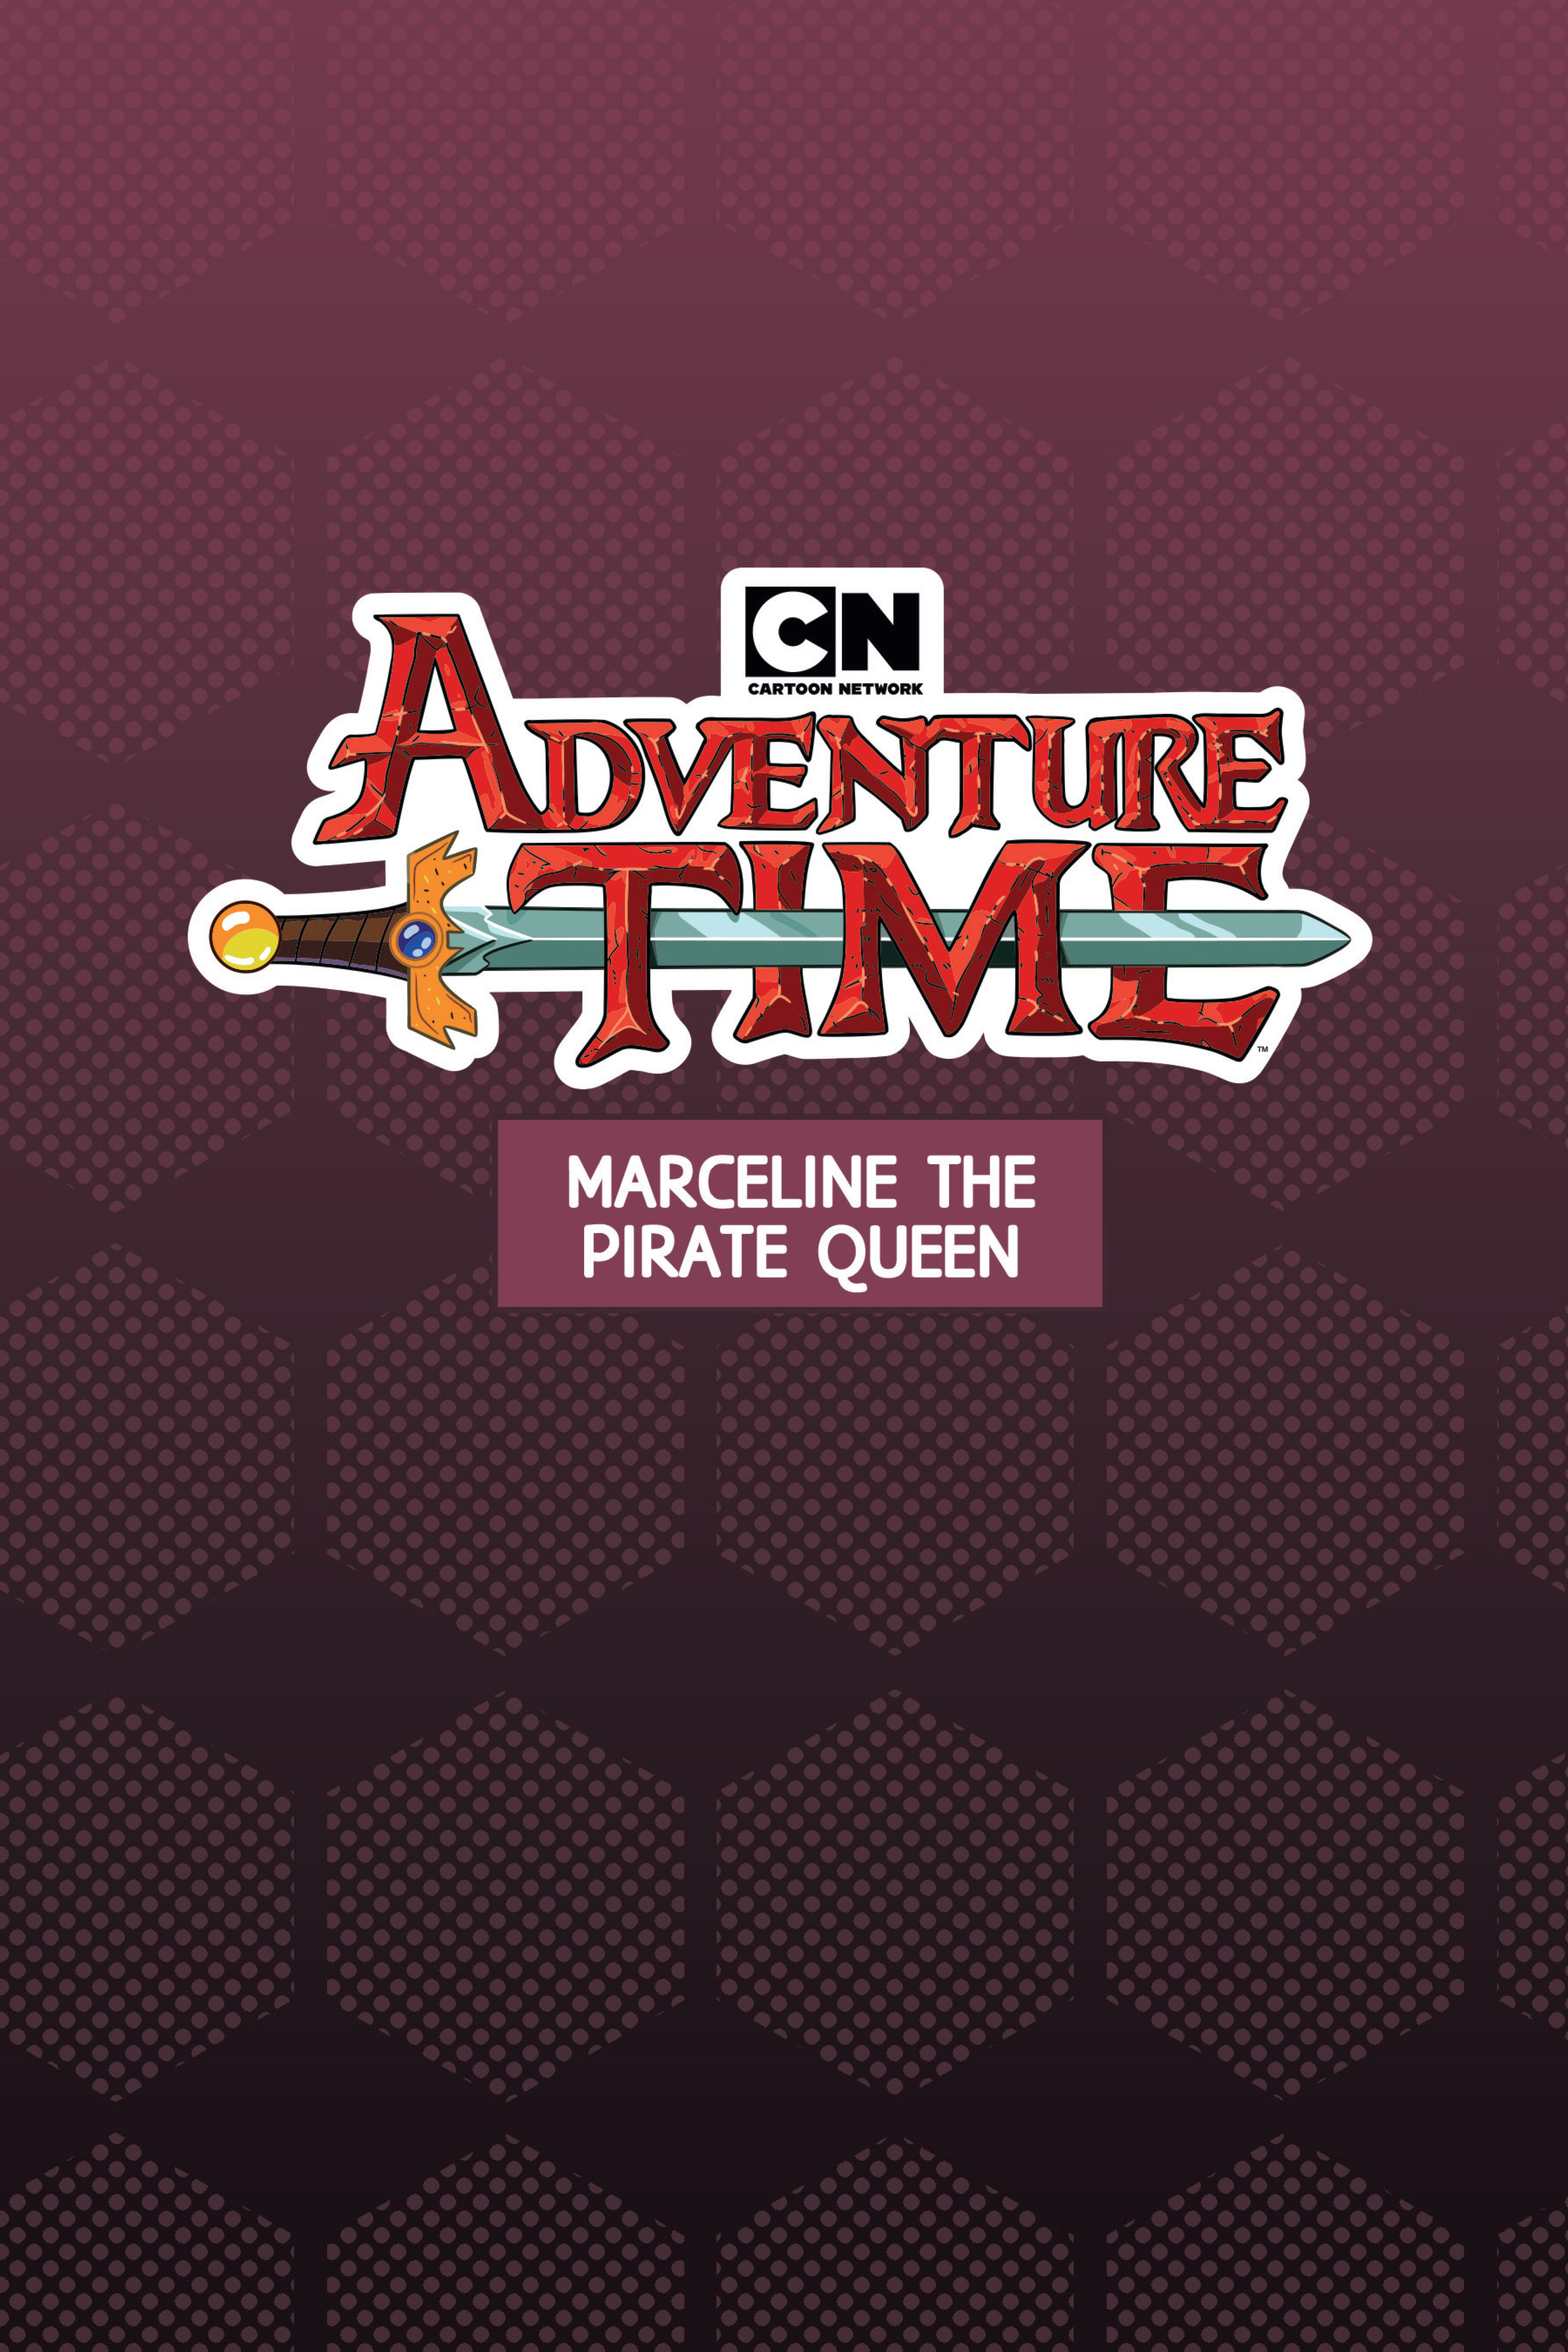 Read online Adventure Time: Marceline the Pirate Queen comic -  Issue # TPB - 3